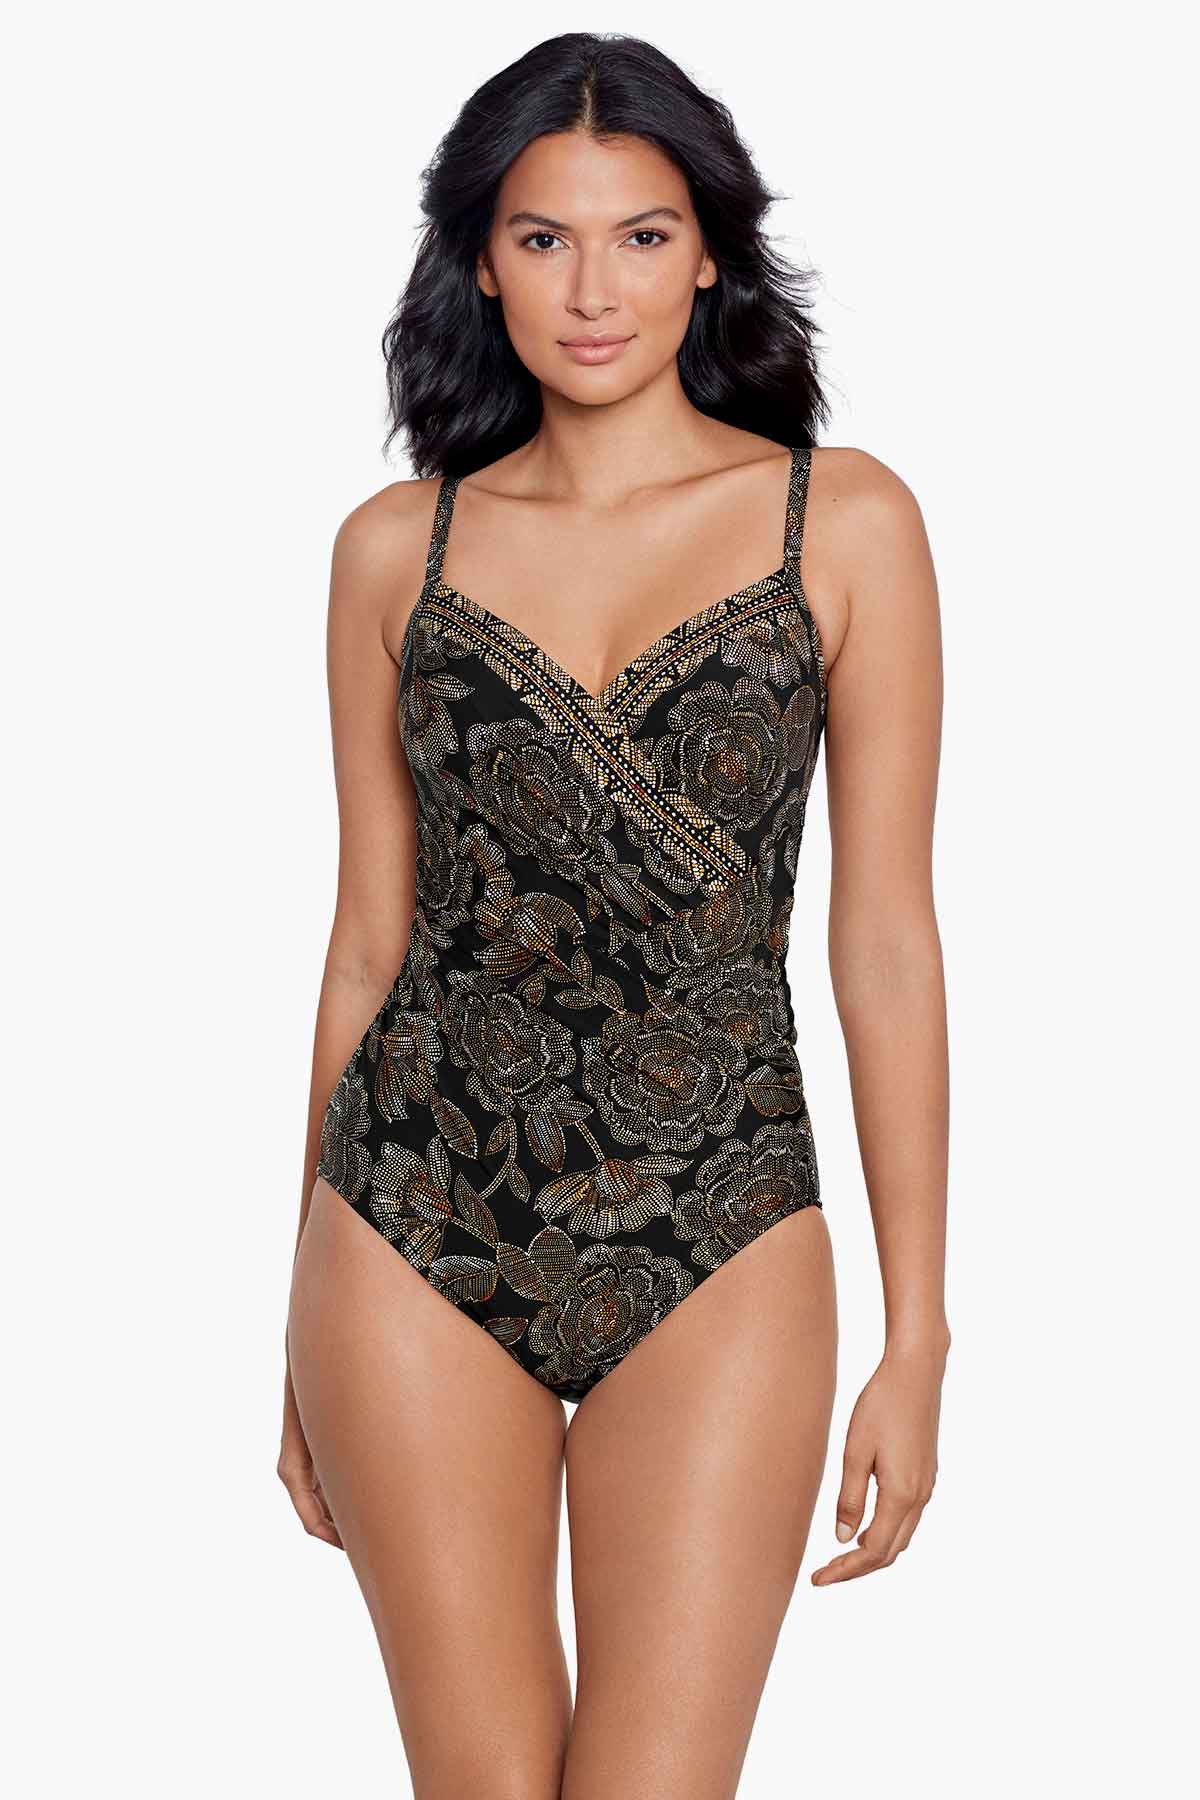 Women's Miraclesuit Lingerie from £34